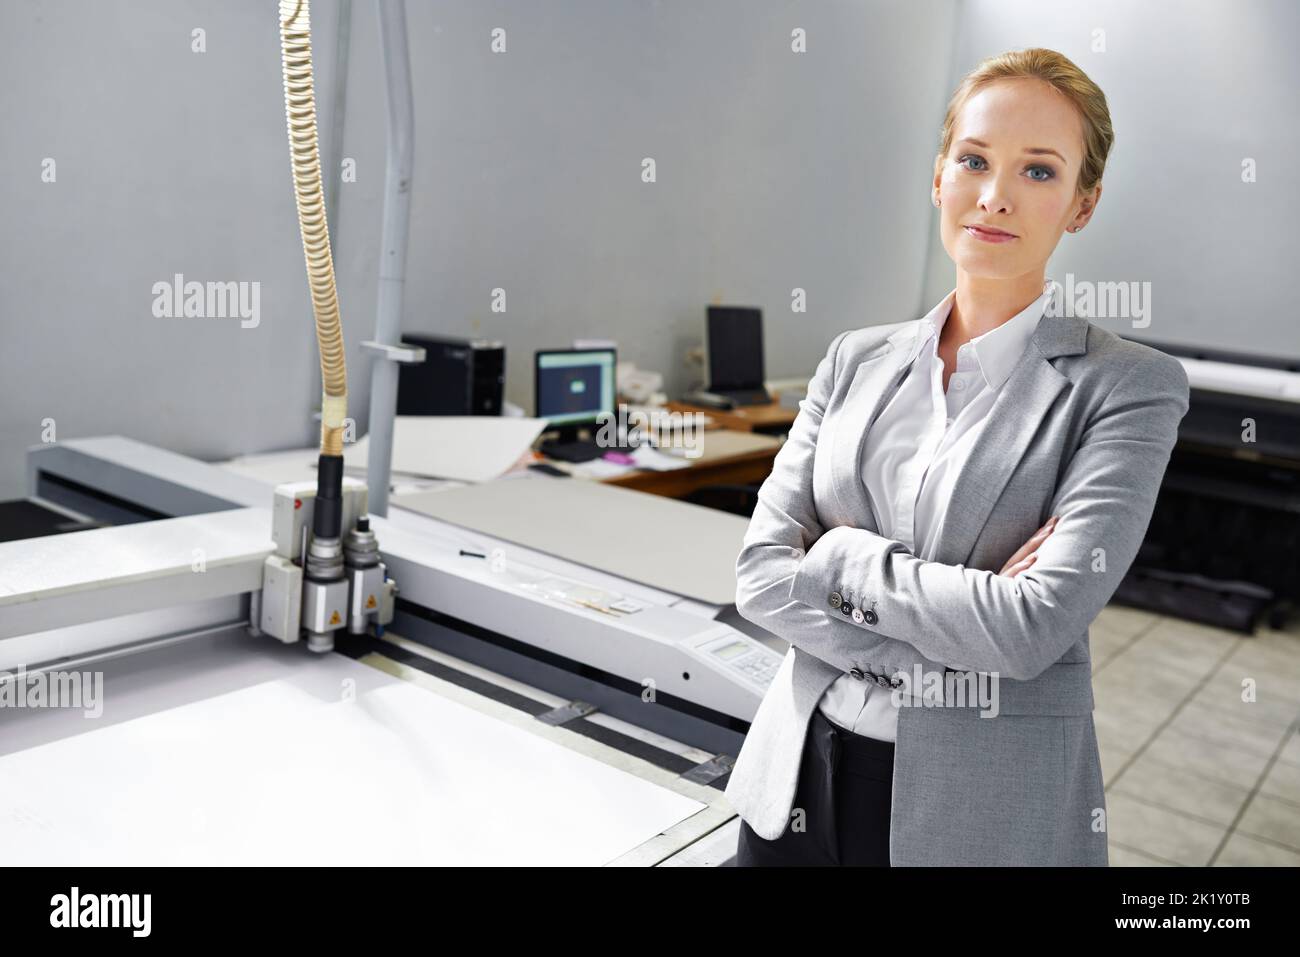 If its printable, we can do it. A self-assured young publisher standing alongside a printing machine. Stock Photo